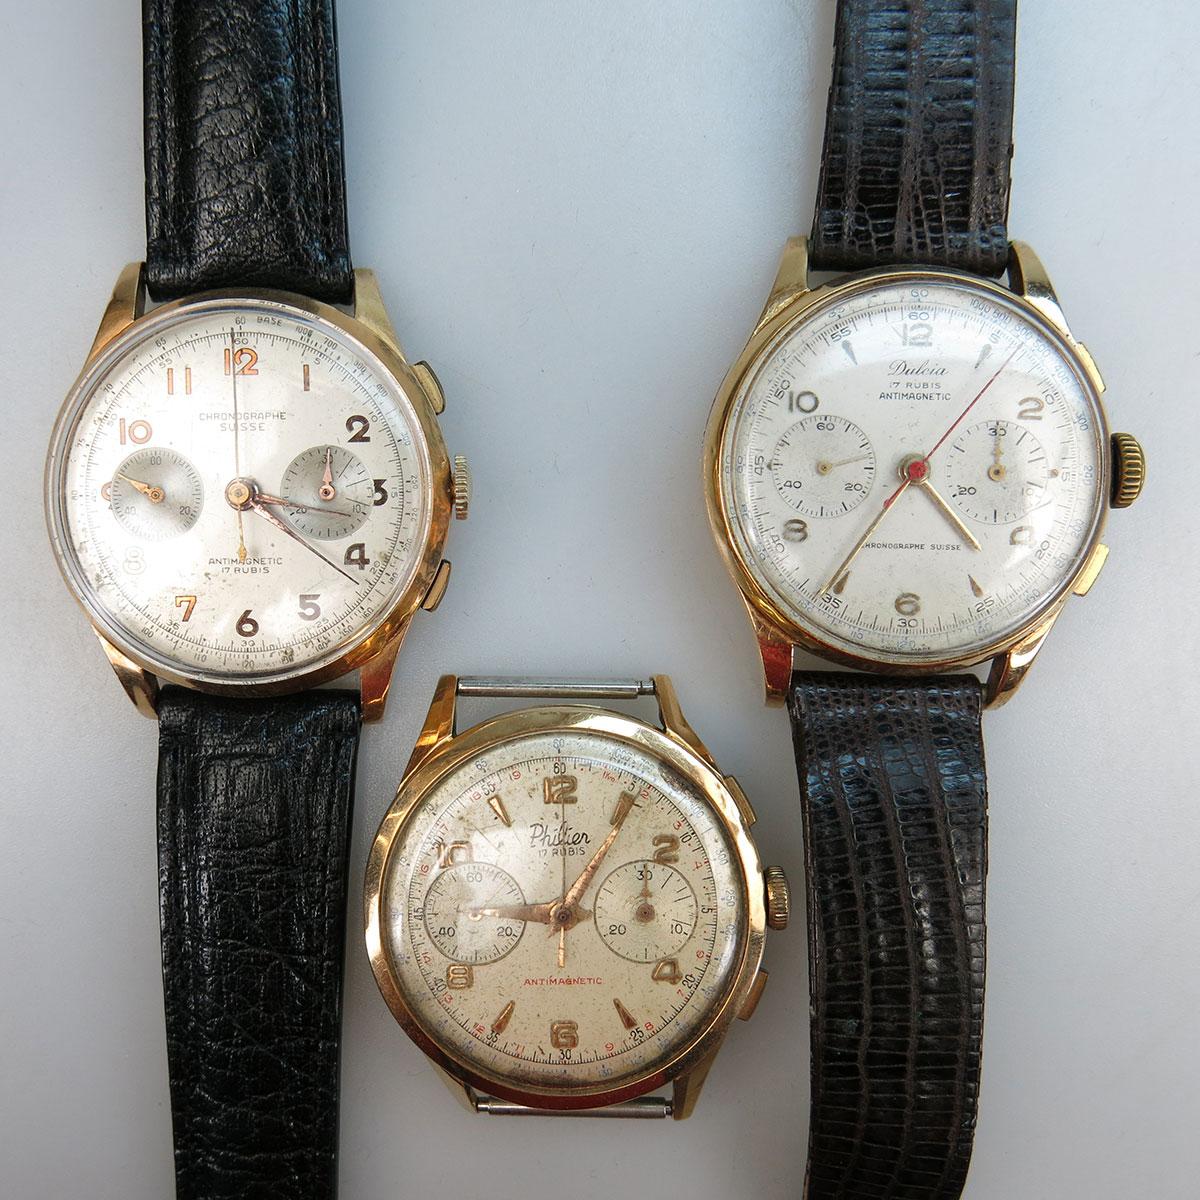 3 Swiss Wristwatches With Chronometers